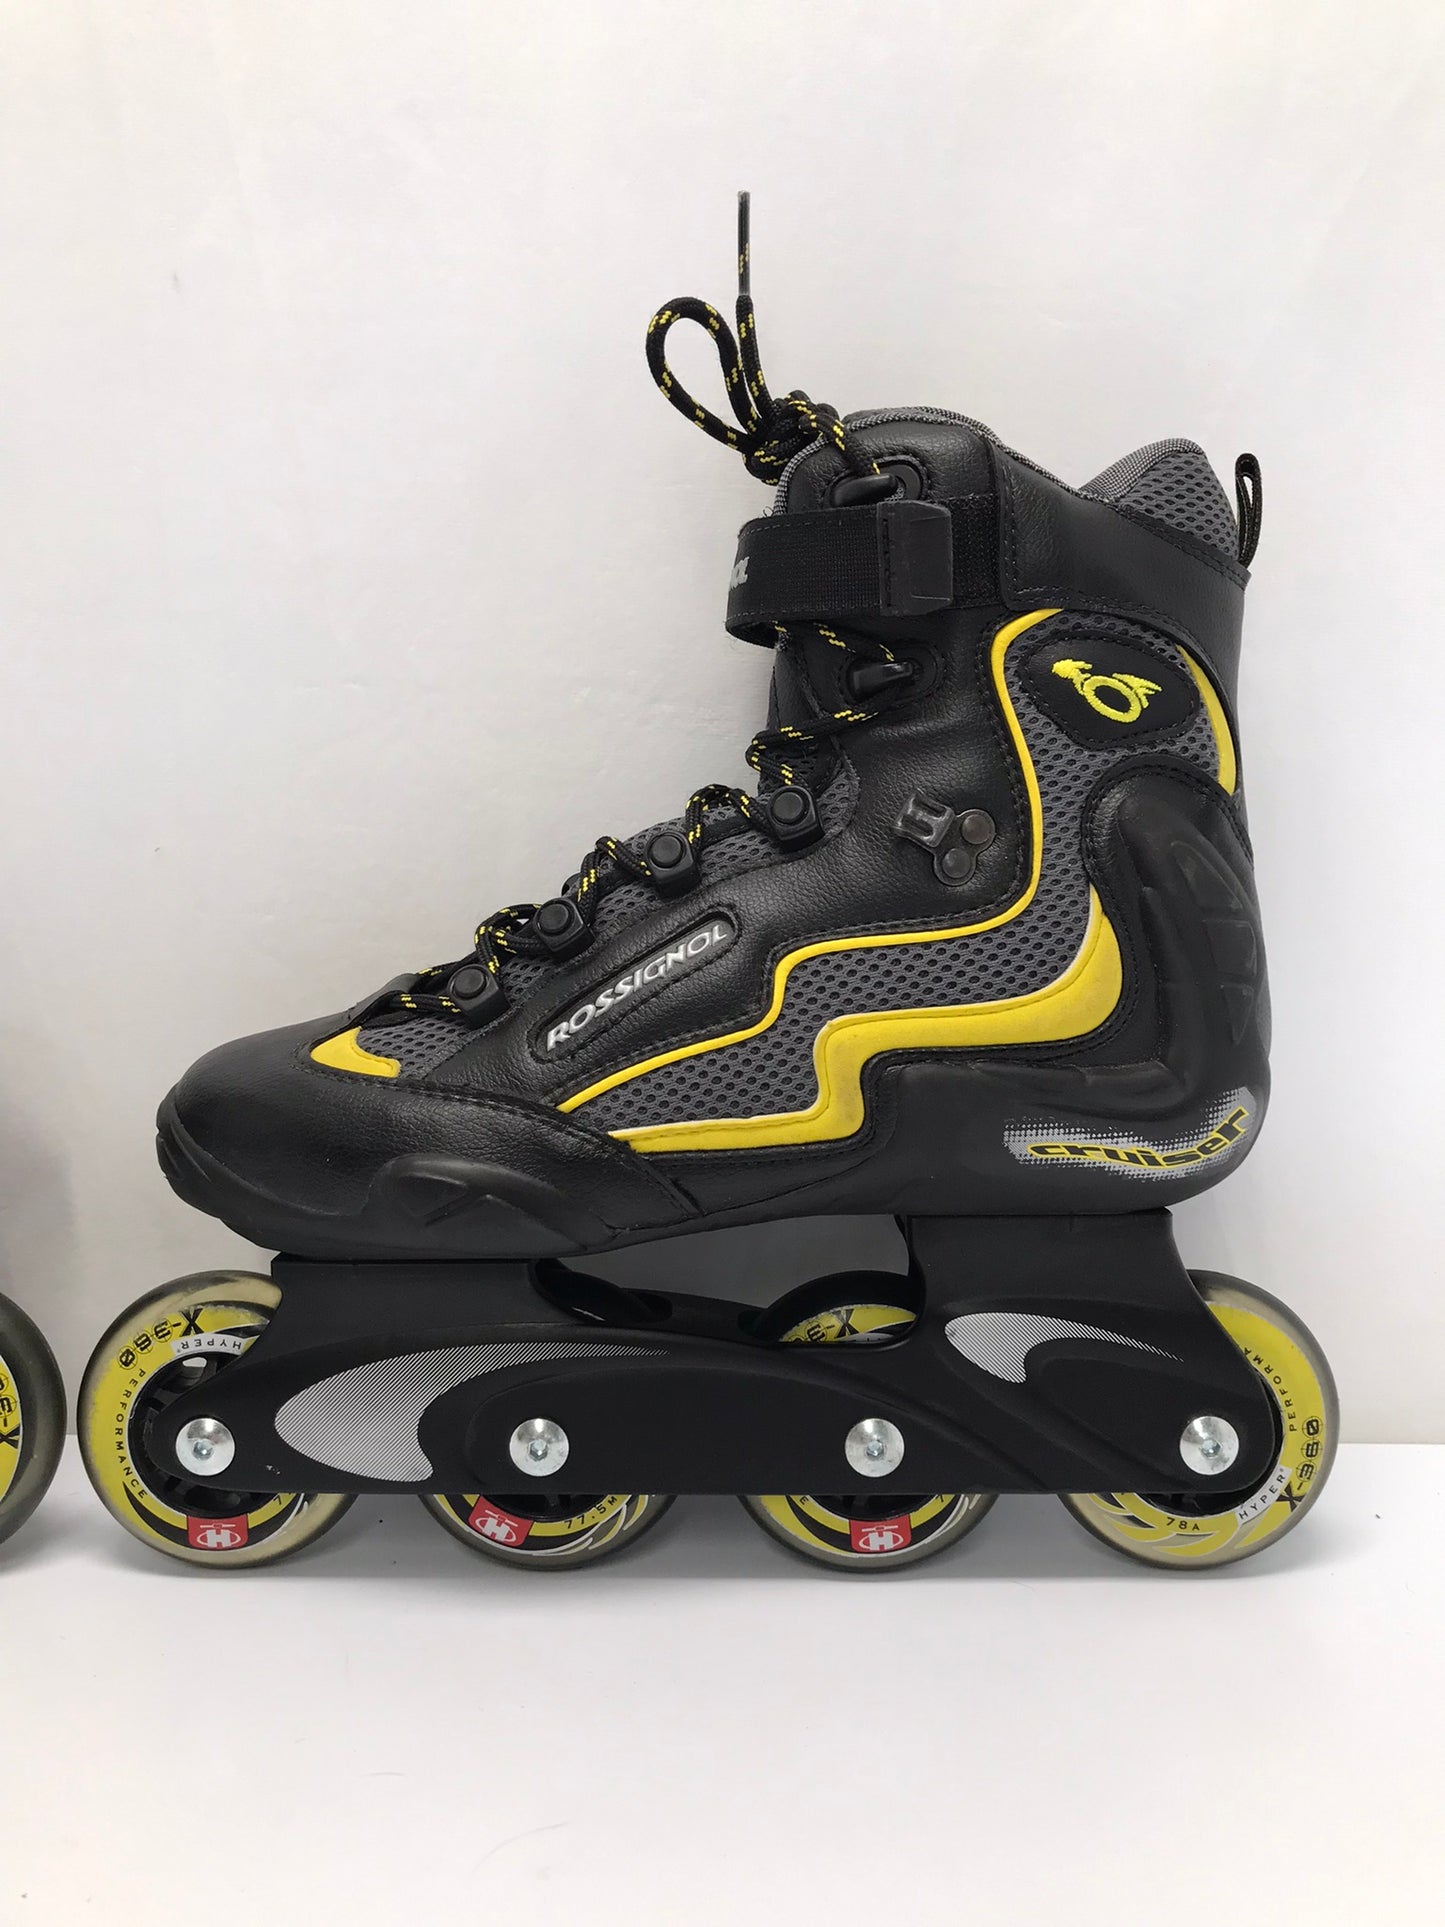 Inline Roller Skates Men's Size 7 Ladies Size 8 Rossignol With Rubber Wheels Black Gold New Demo Model